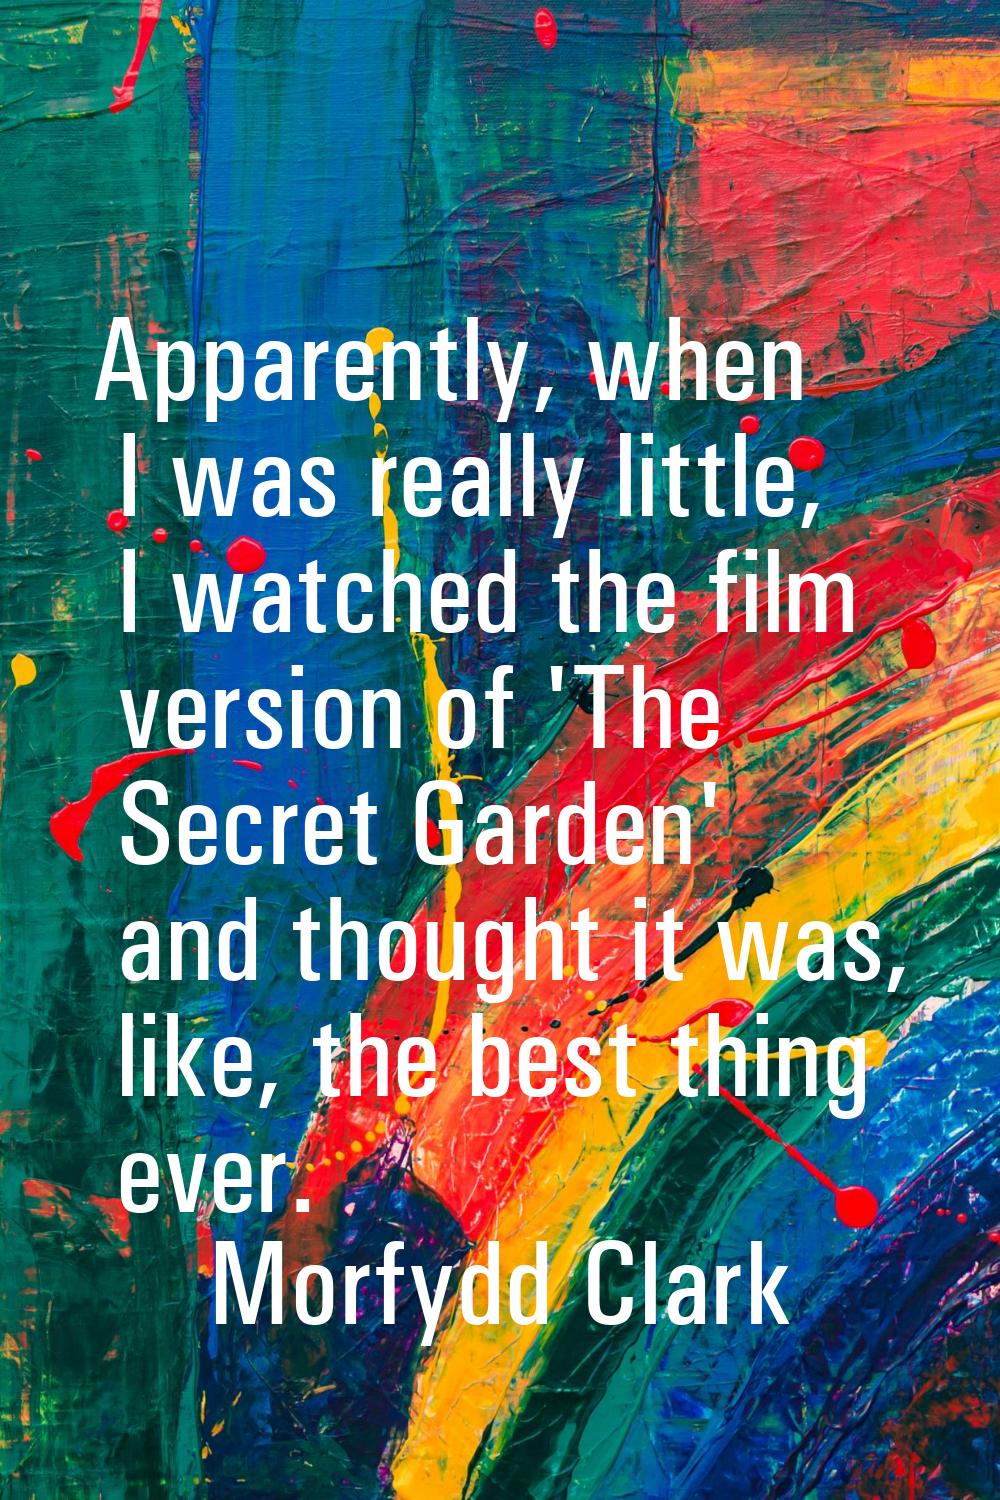 Apparently, when I was really little, I watched the film version of 'The Secret Garden' and thought